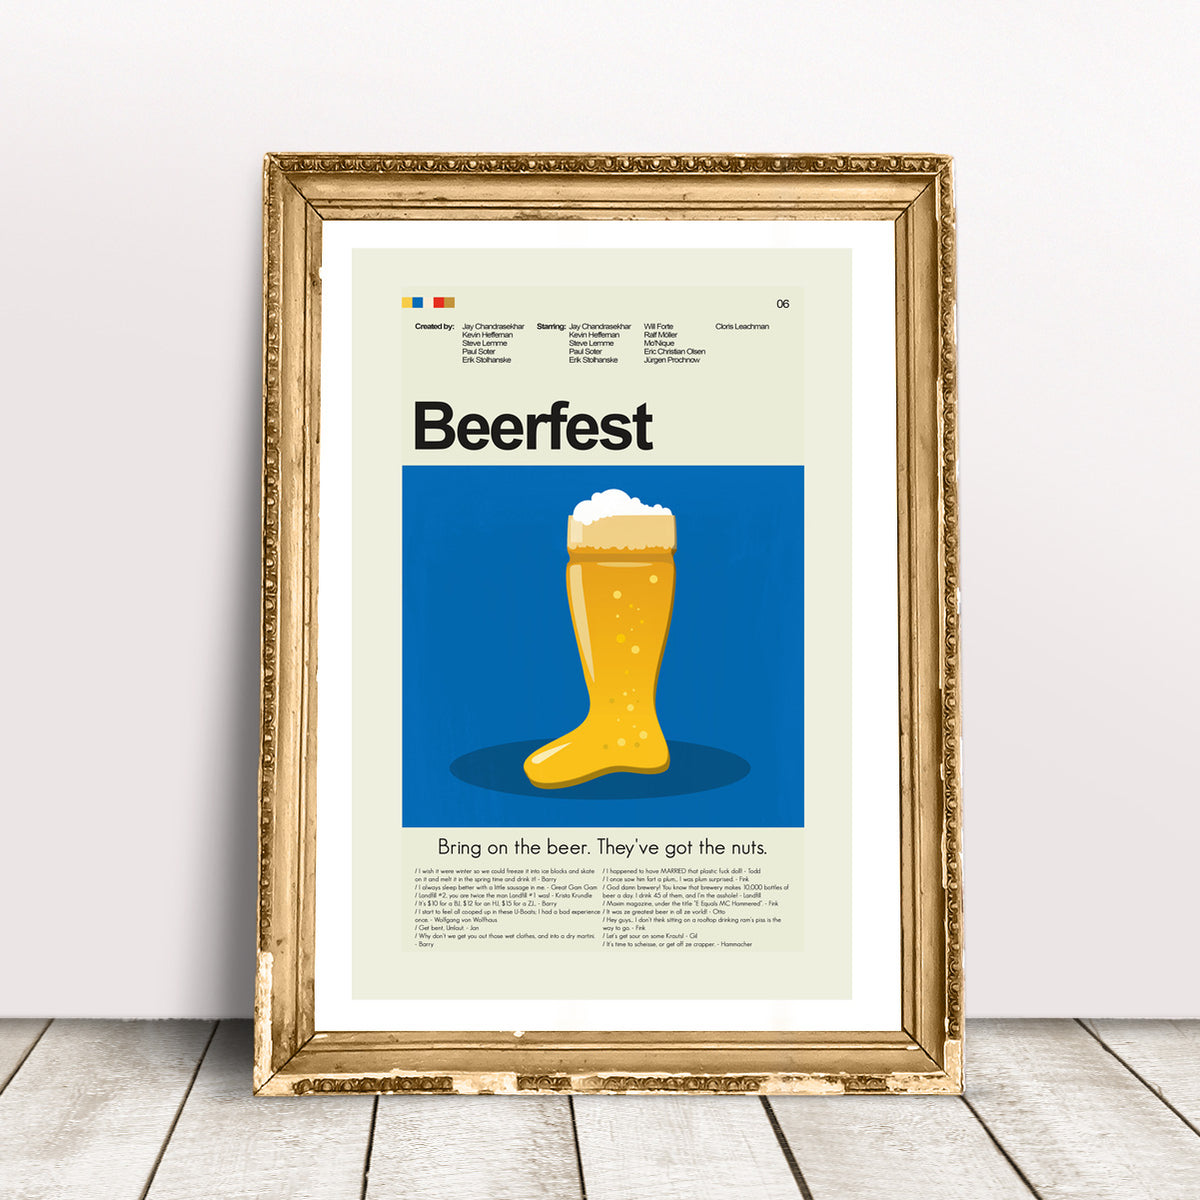 Beerfest - Das Boot | 12"x18" or 18"x24" Print only